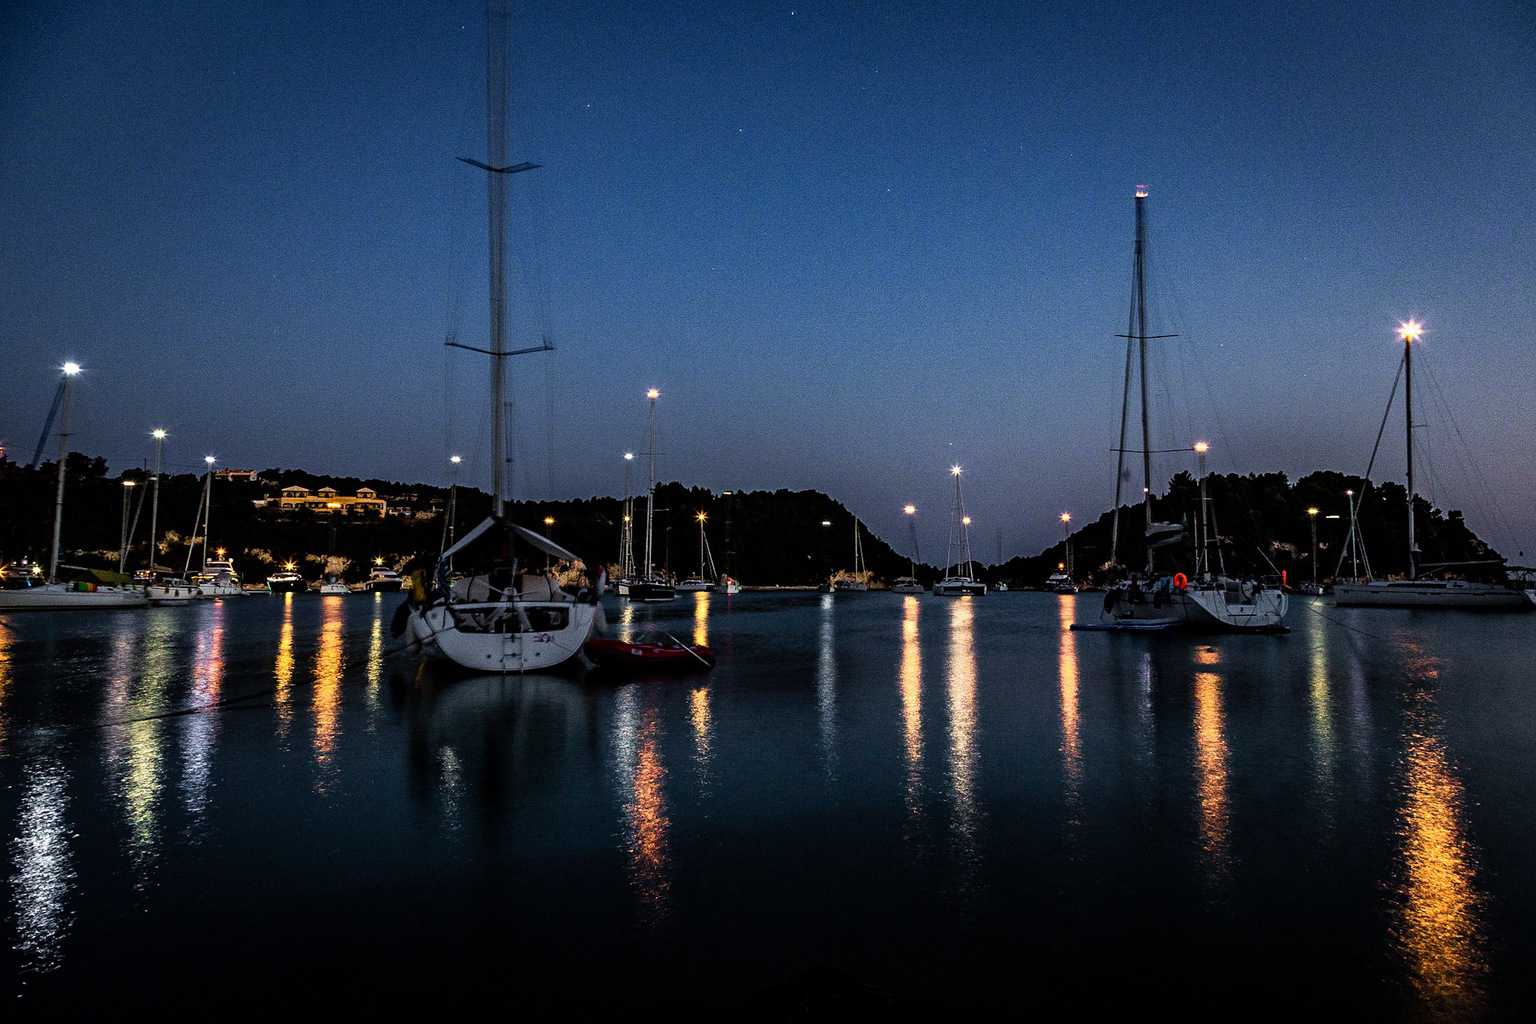  Boats in the night moored at Lakka on the Greek Island of Paxos 